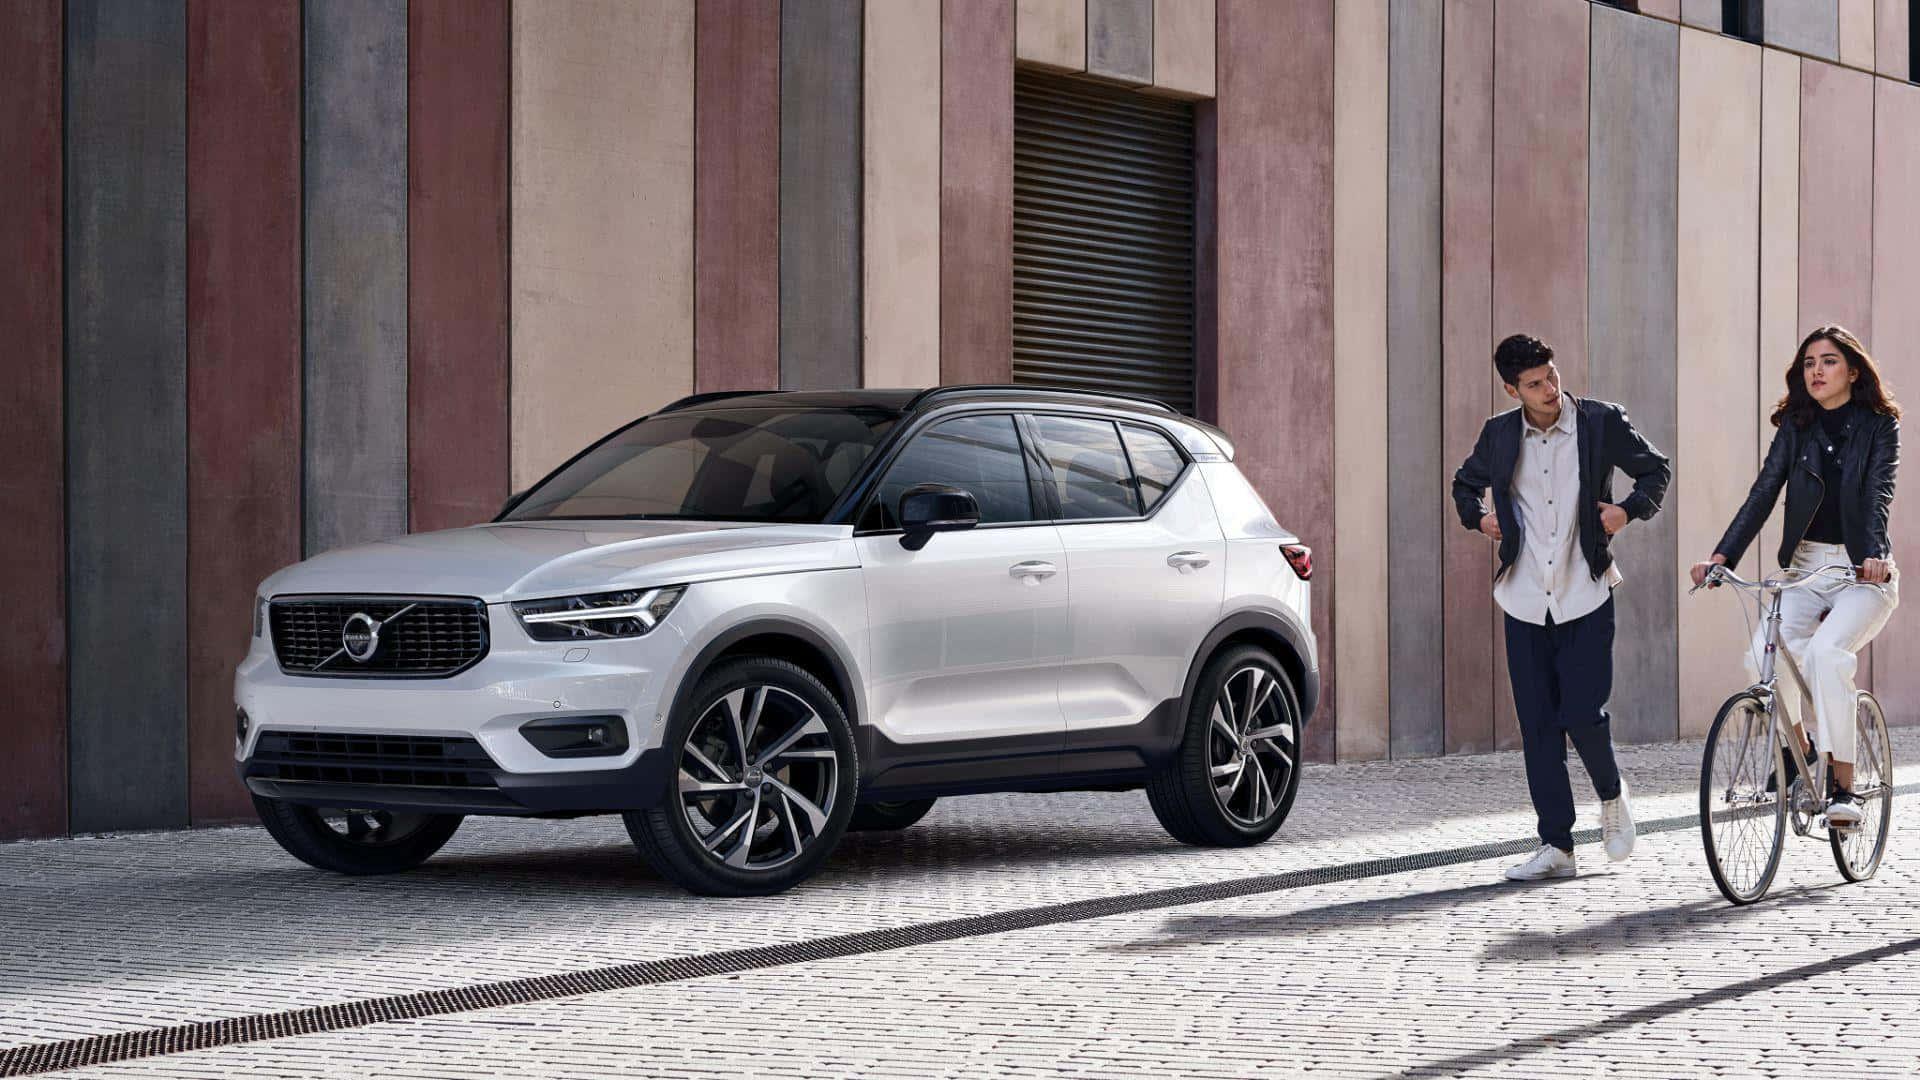 Caption: "sleek Silver Volvo Xc40 Perfectly Captured On A Sunny Day" Wallpaper